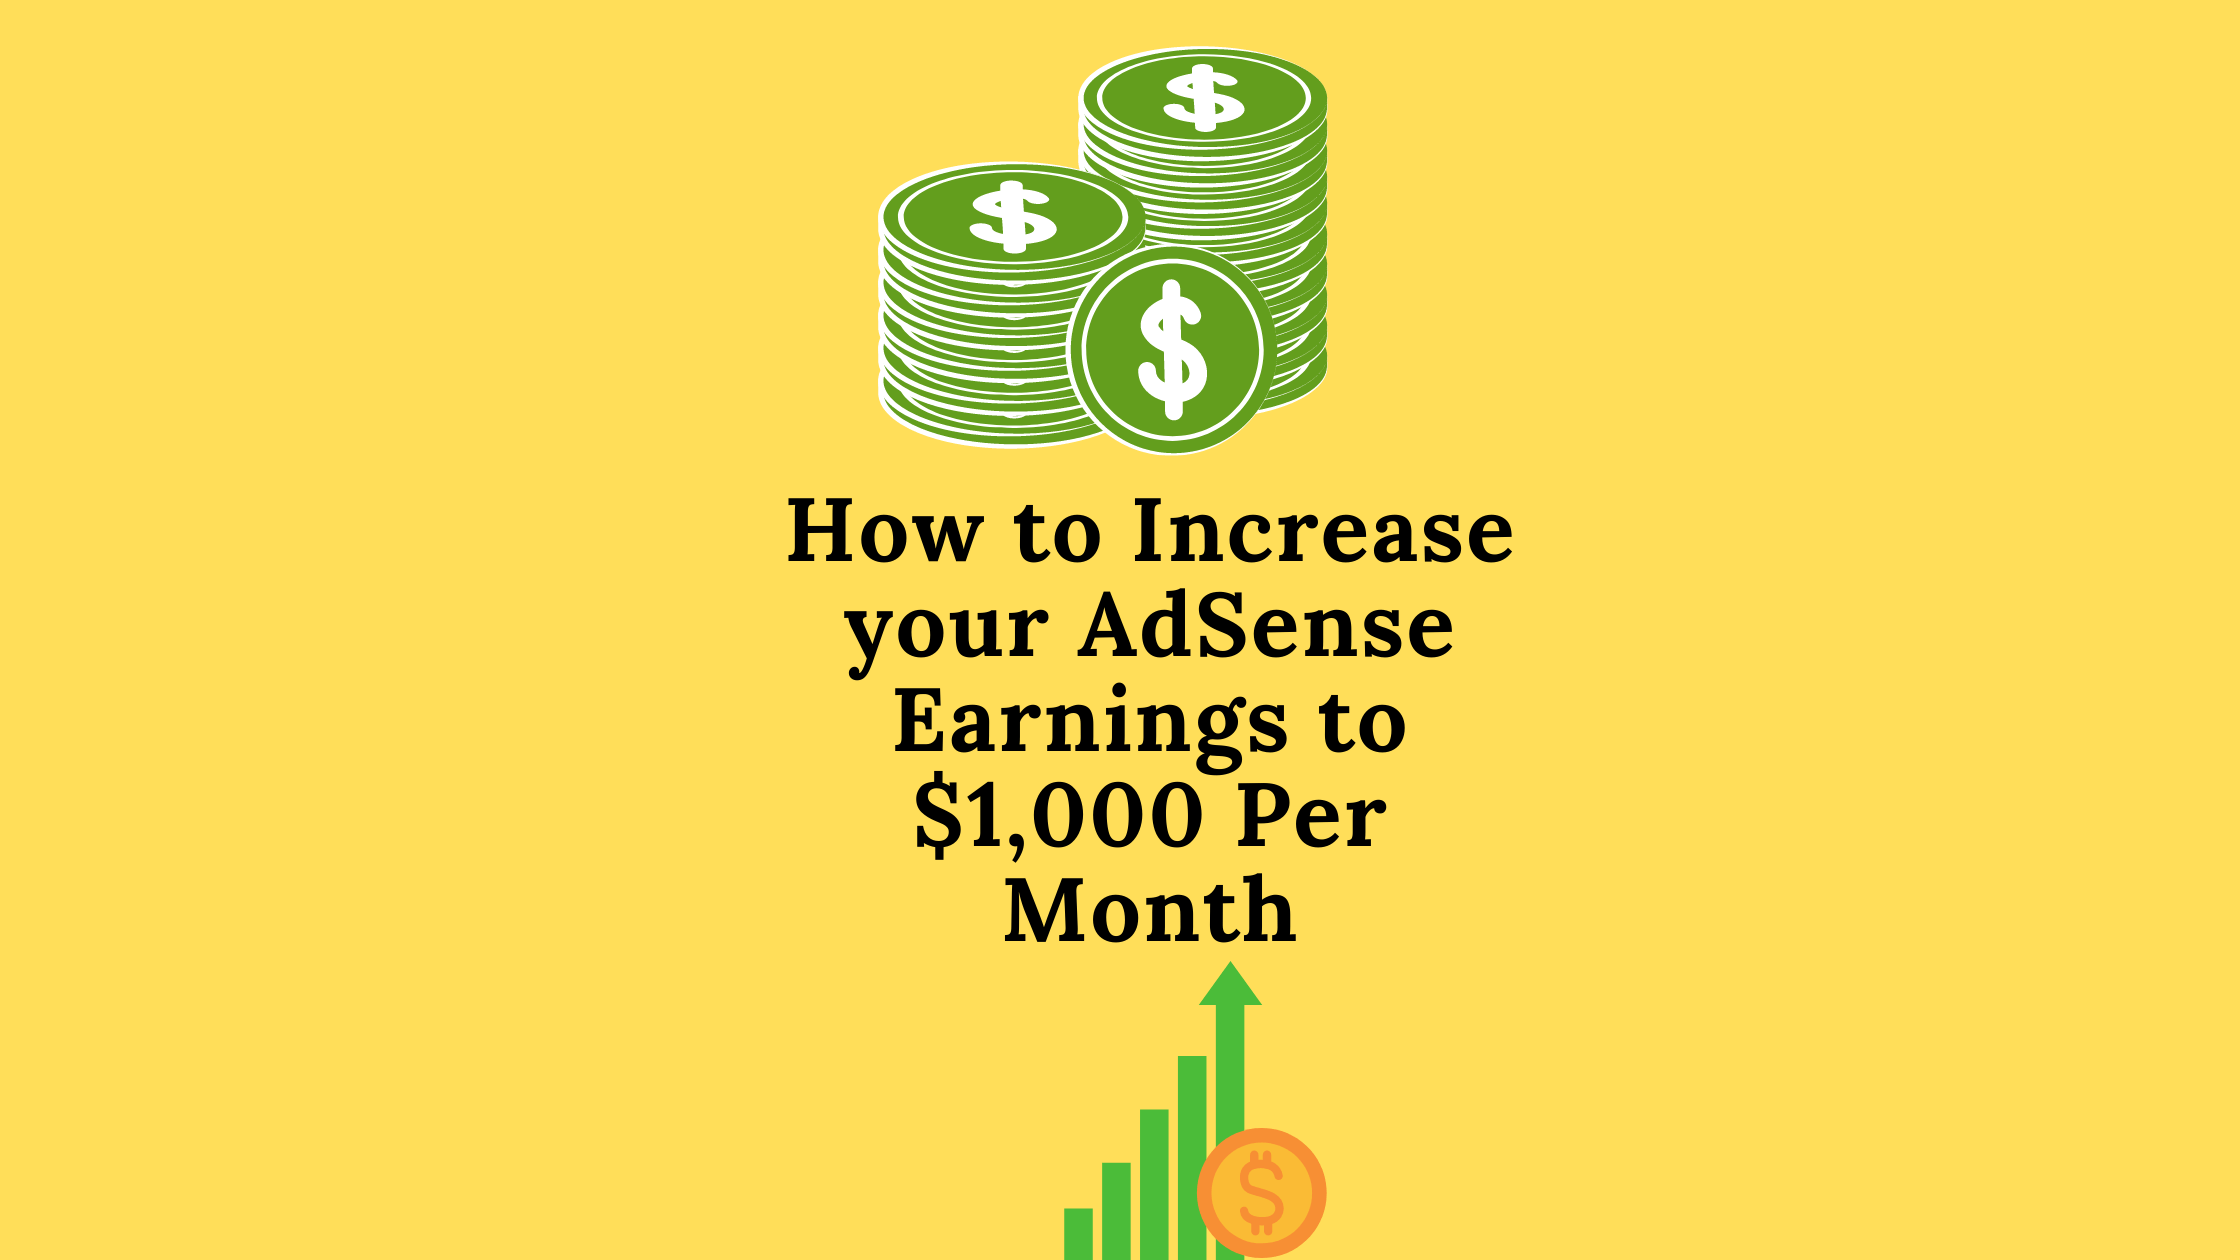 How to Increase your AdSense Earnings to $1,000 Per Month